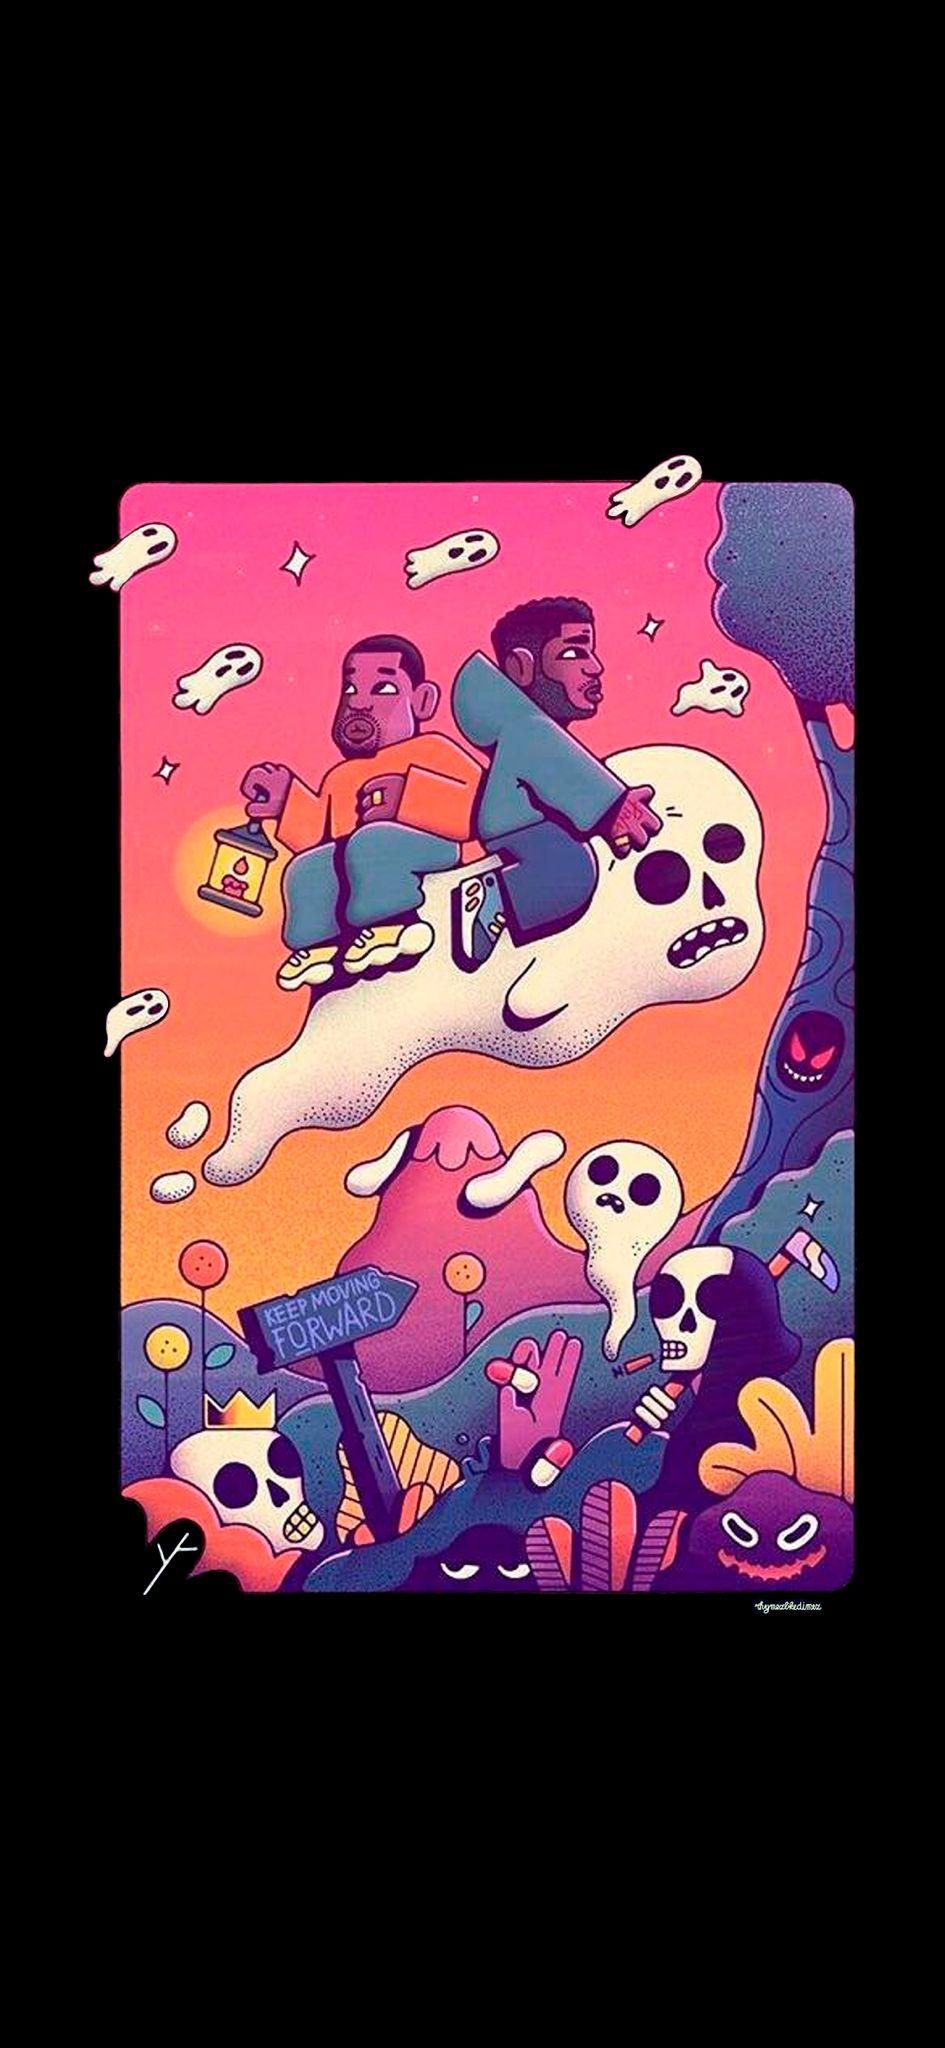 Kids see ghosts iPhone X wallpaper (w/ signature)